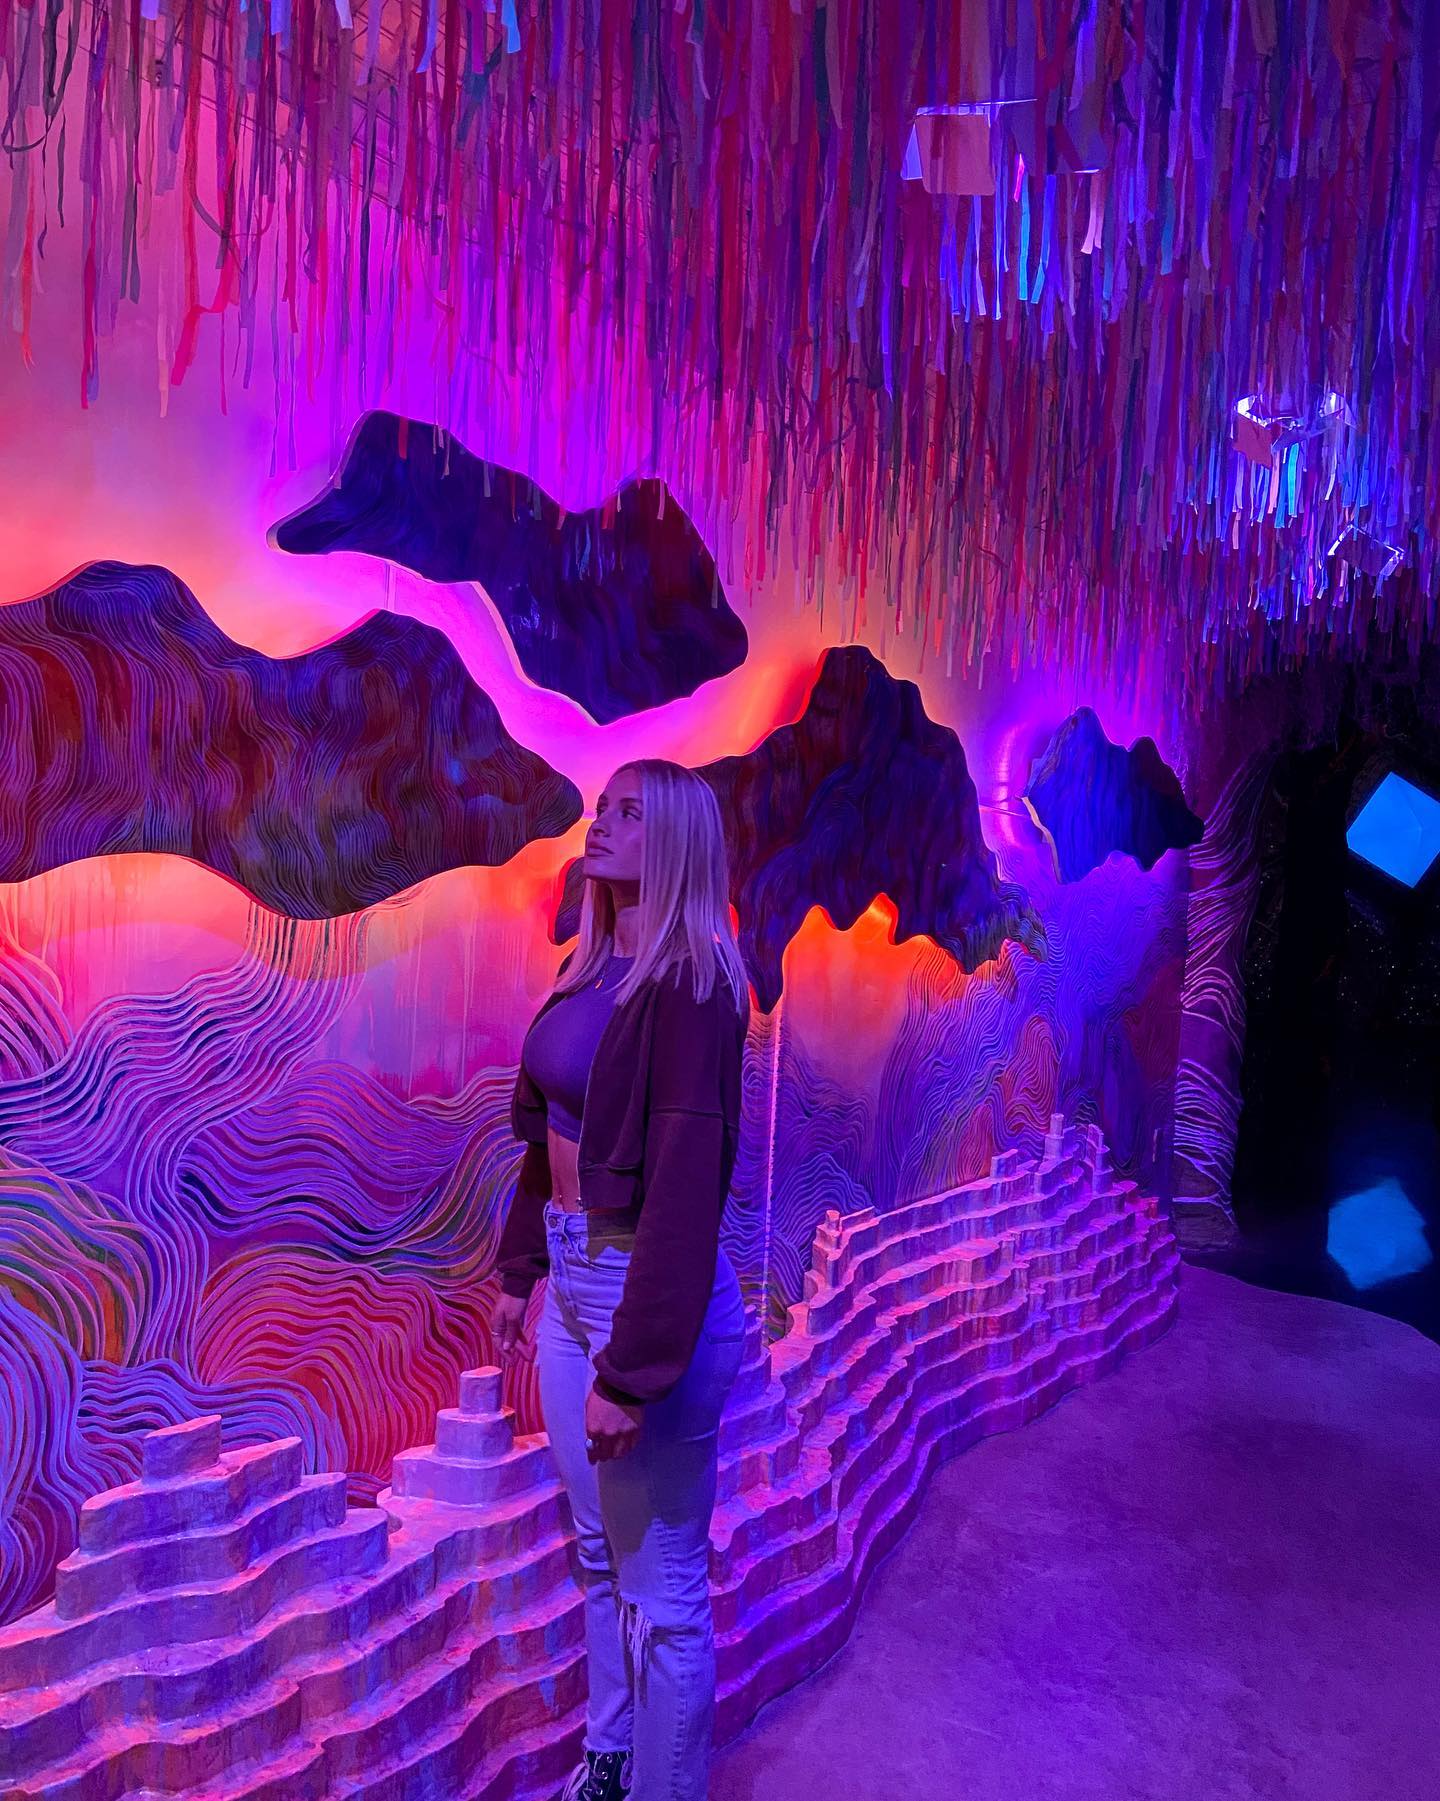 1672174141 726 Meow wolf the other day Vega Thompson